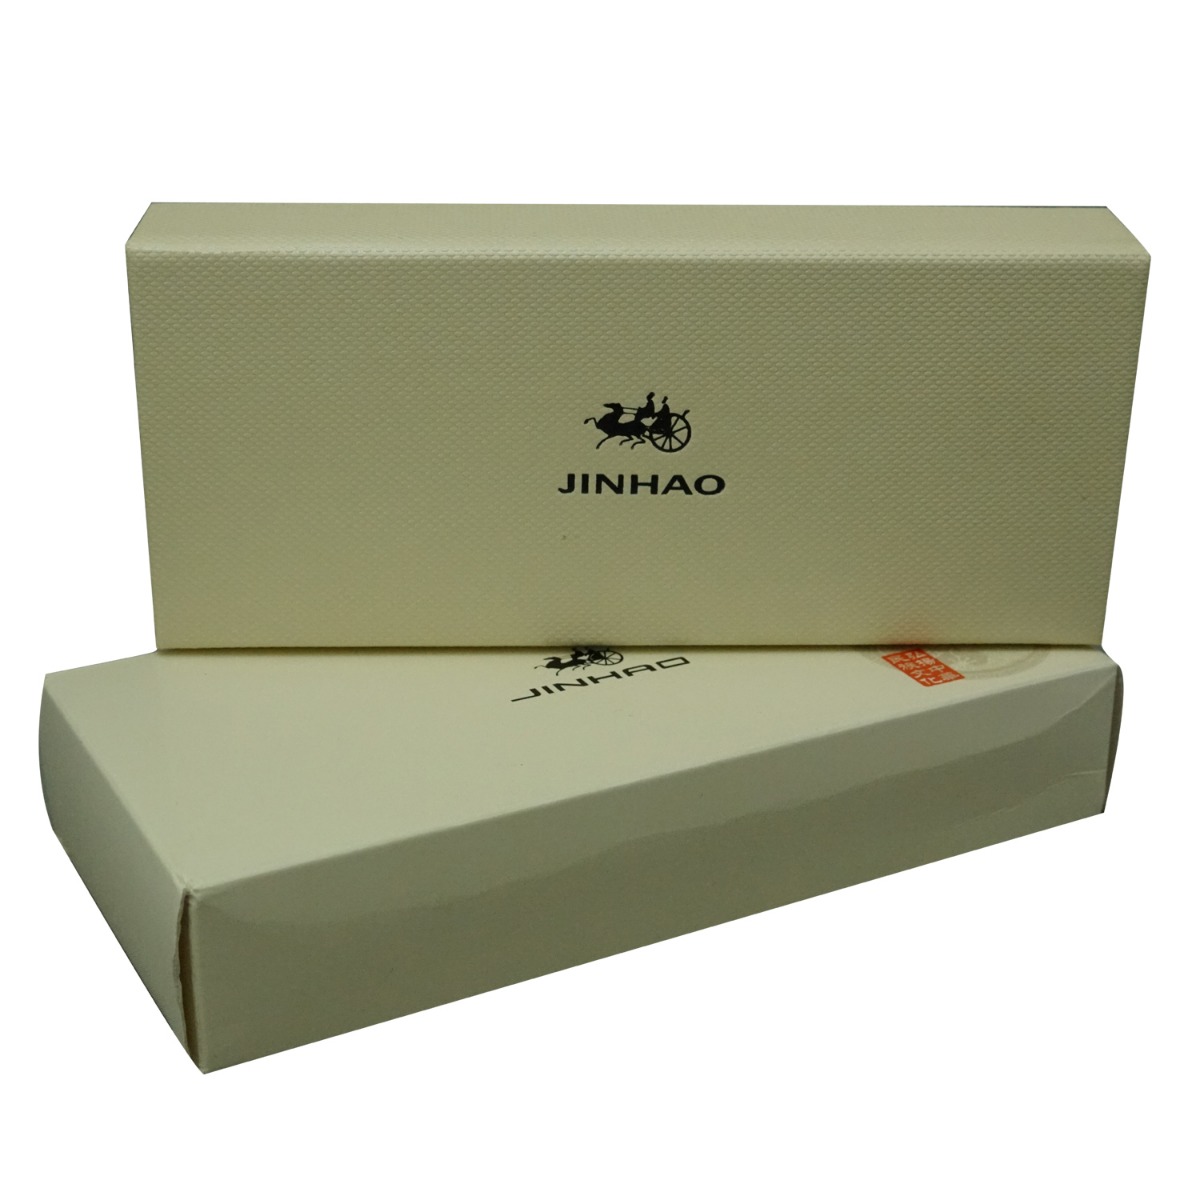 Jinhao  Box Model: 16231  Cream Clor  Deluxe Fashion Box with Magnetic Closing Double  Pen Holding Type